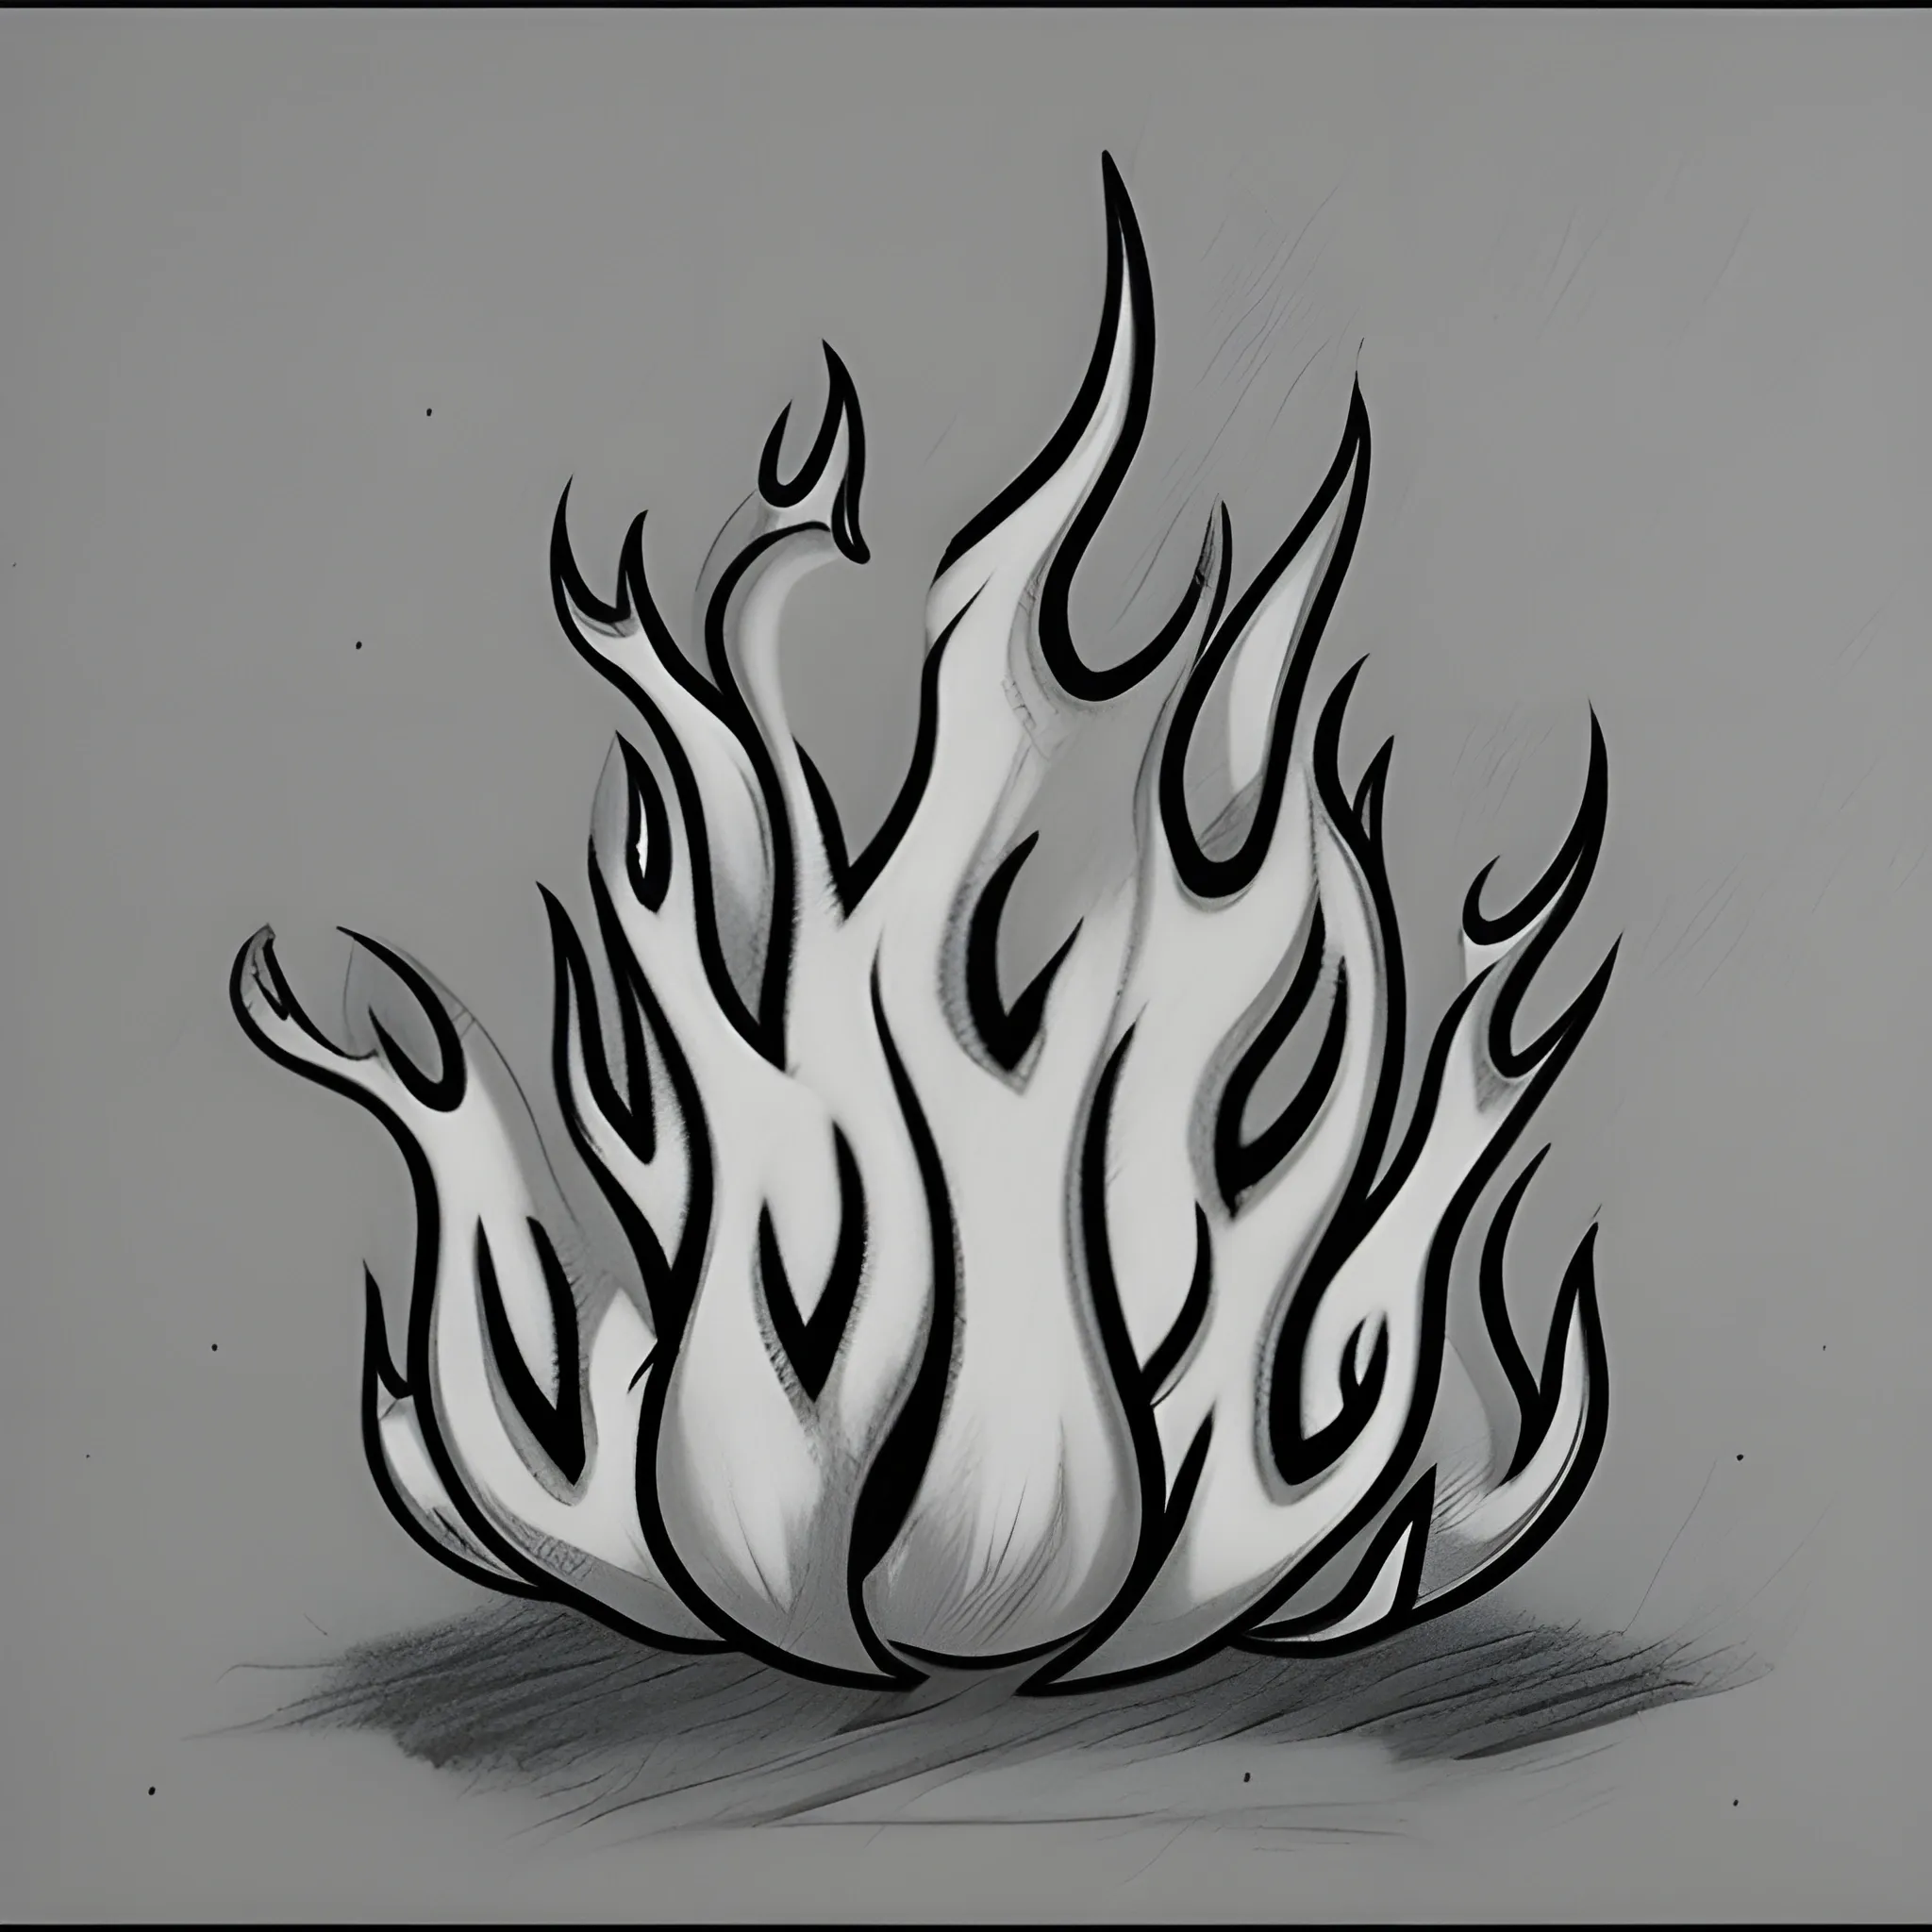 flames,Metallic, Cartoon style, only flames, , Pencil Sketch